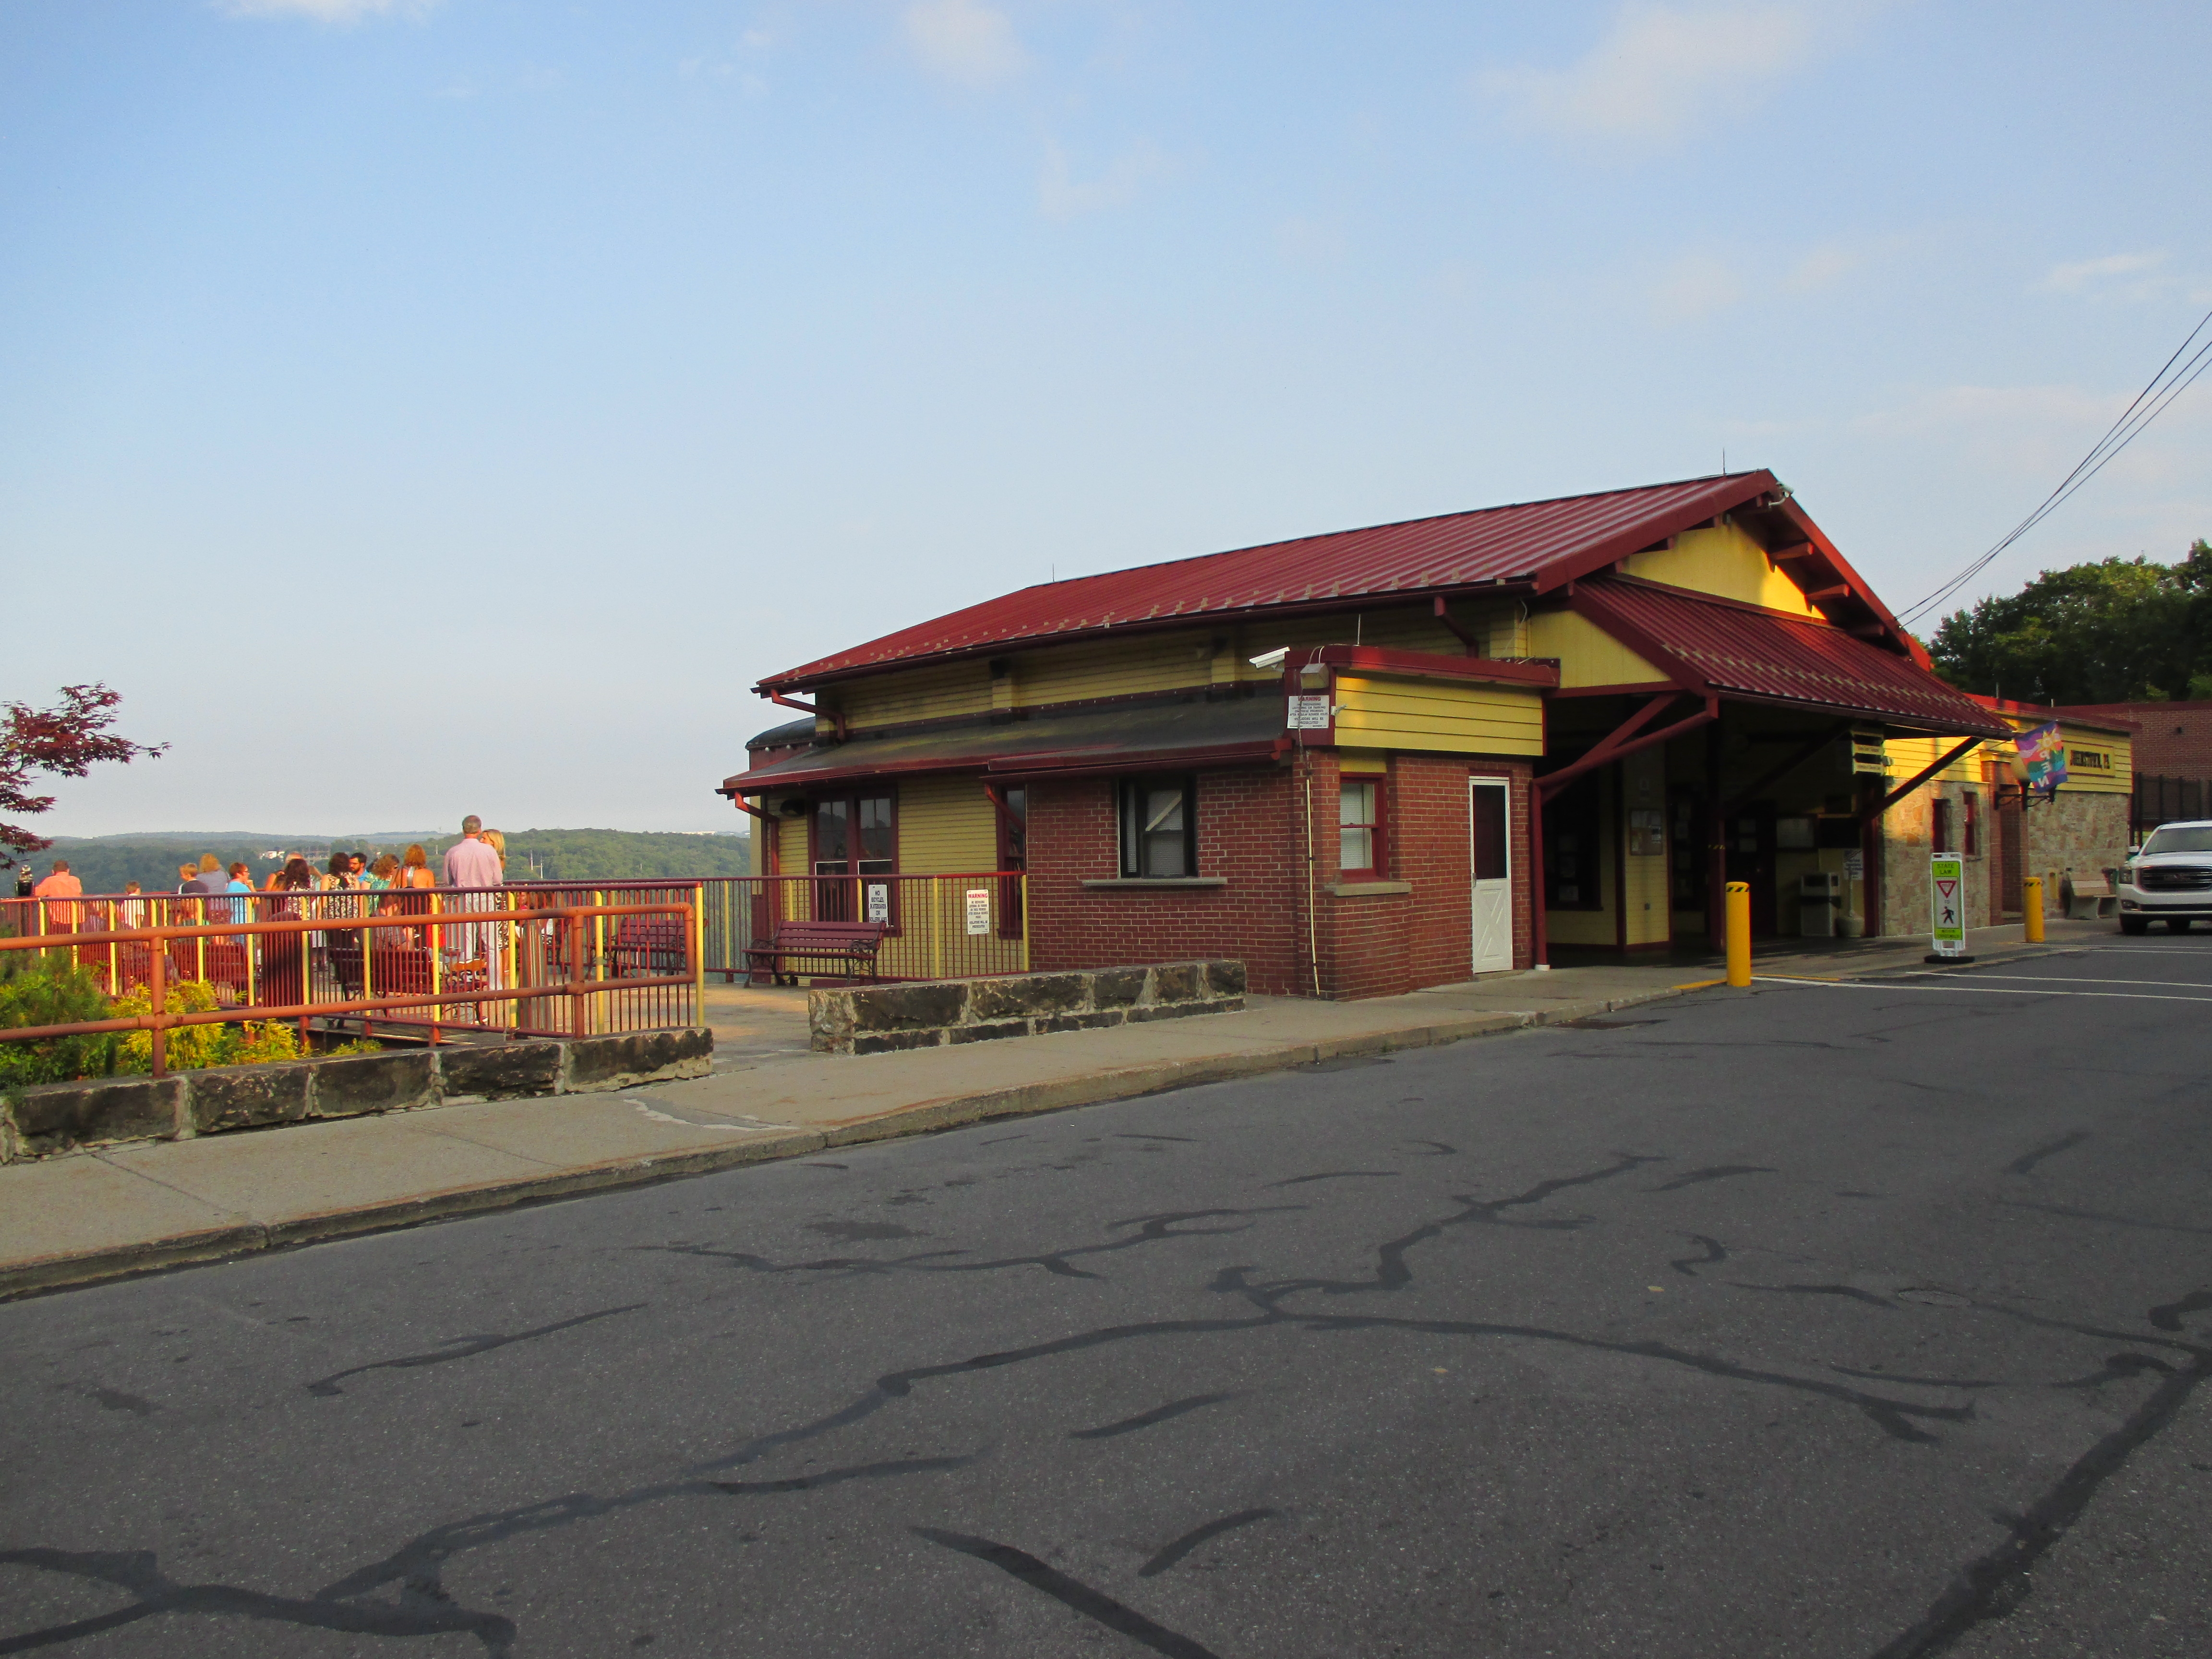 The Overlook Structure and the Inclined Plane Station